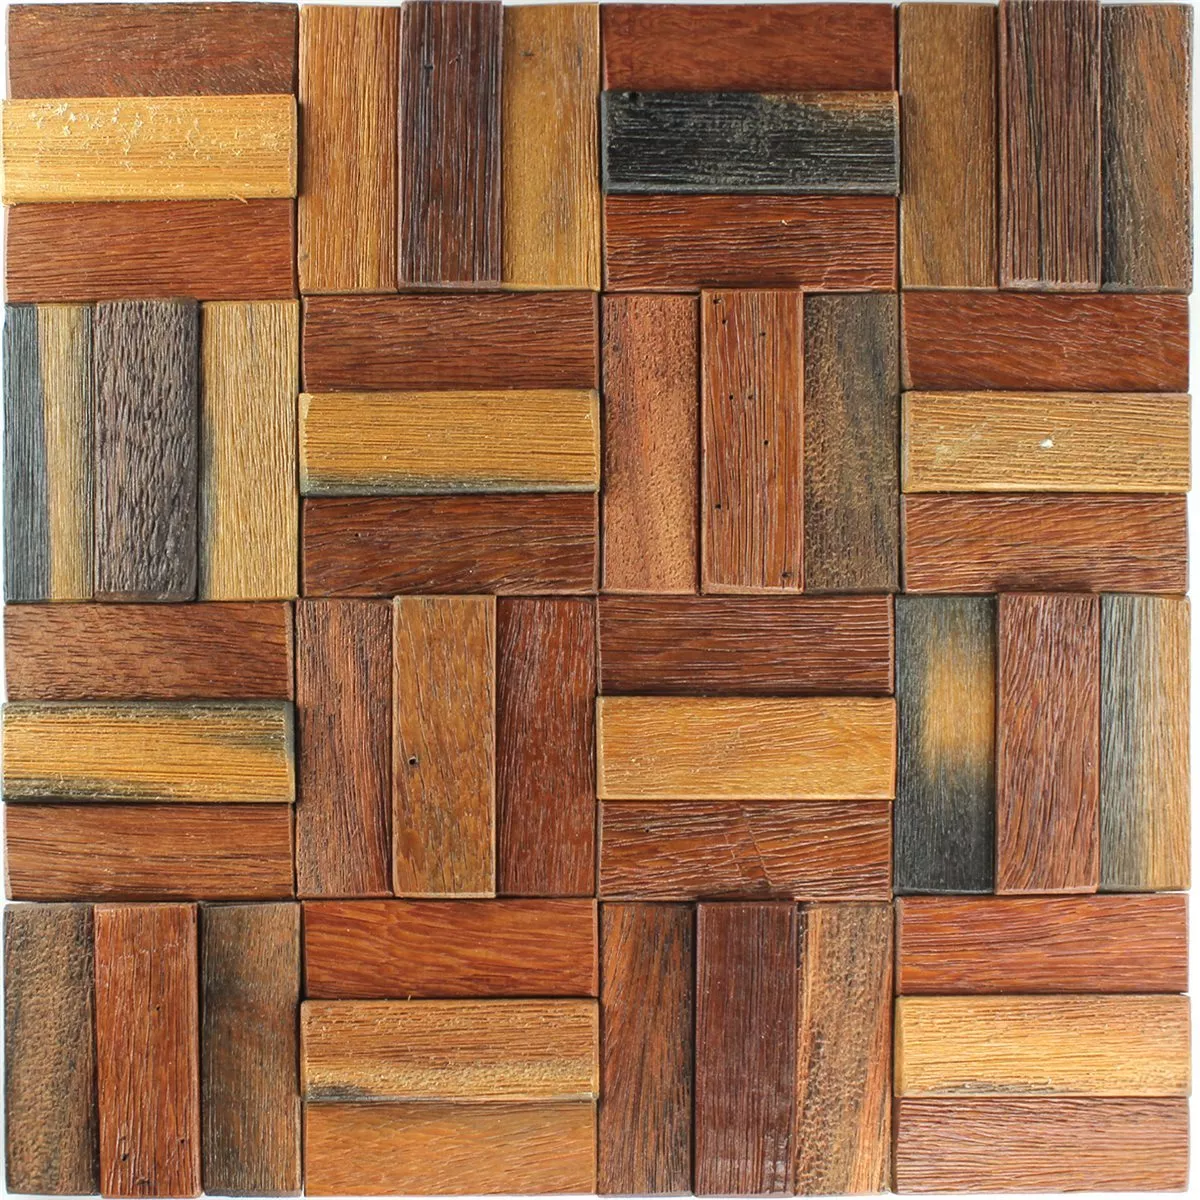 Sample Wood Mosaic Tiles Planks Lacquered